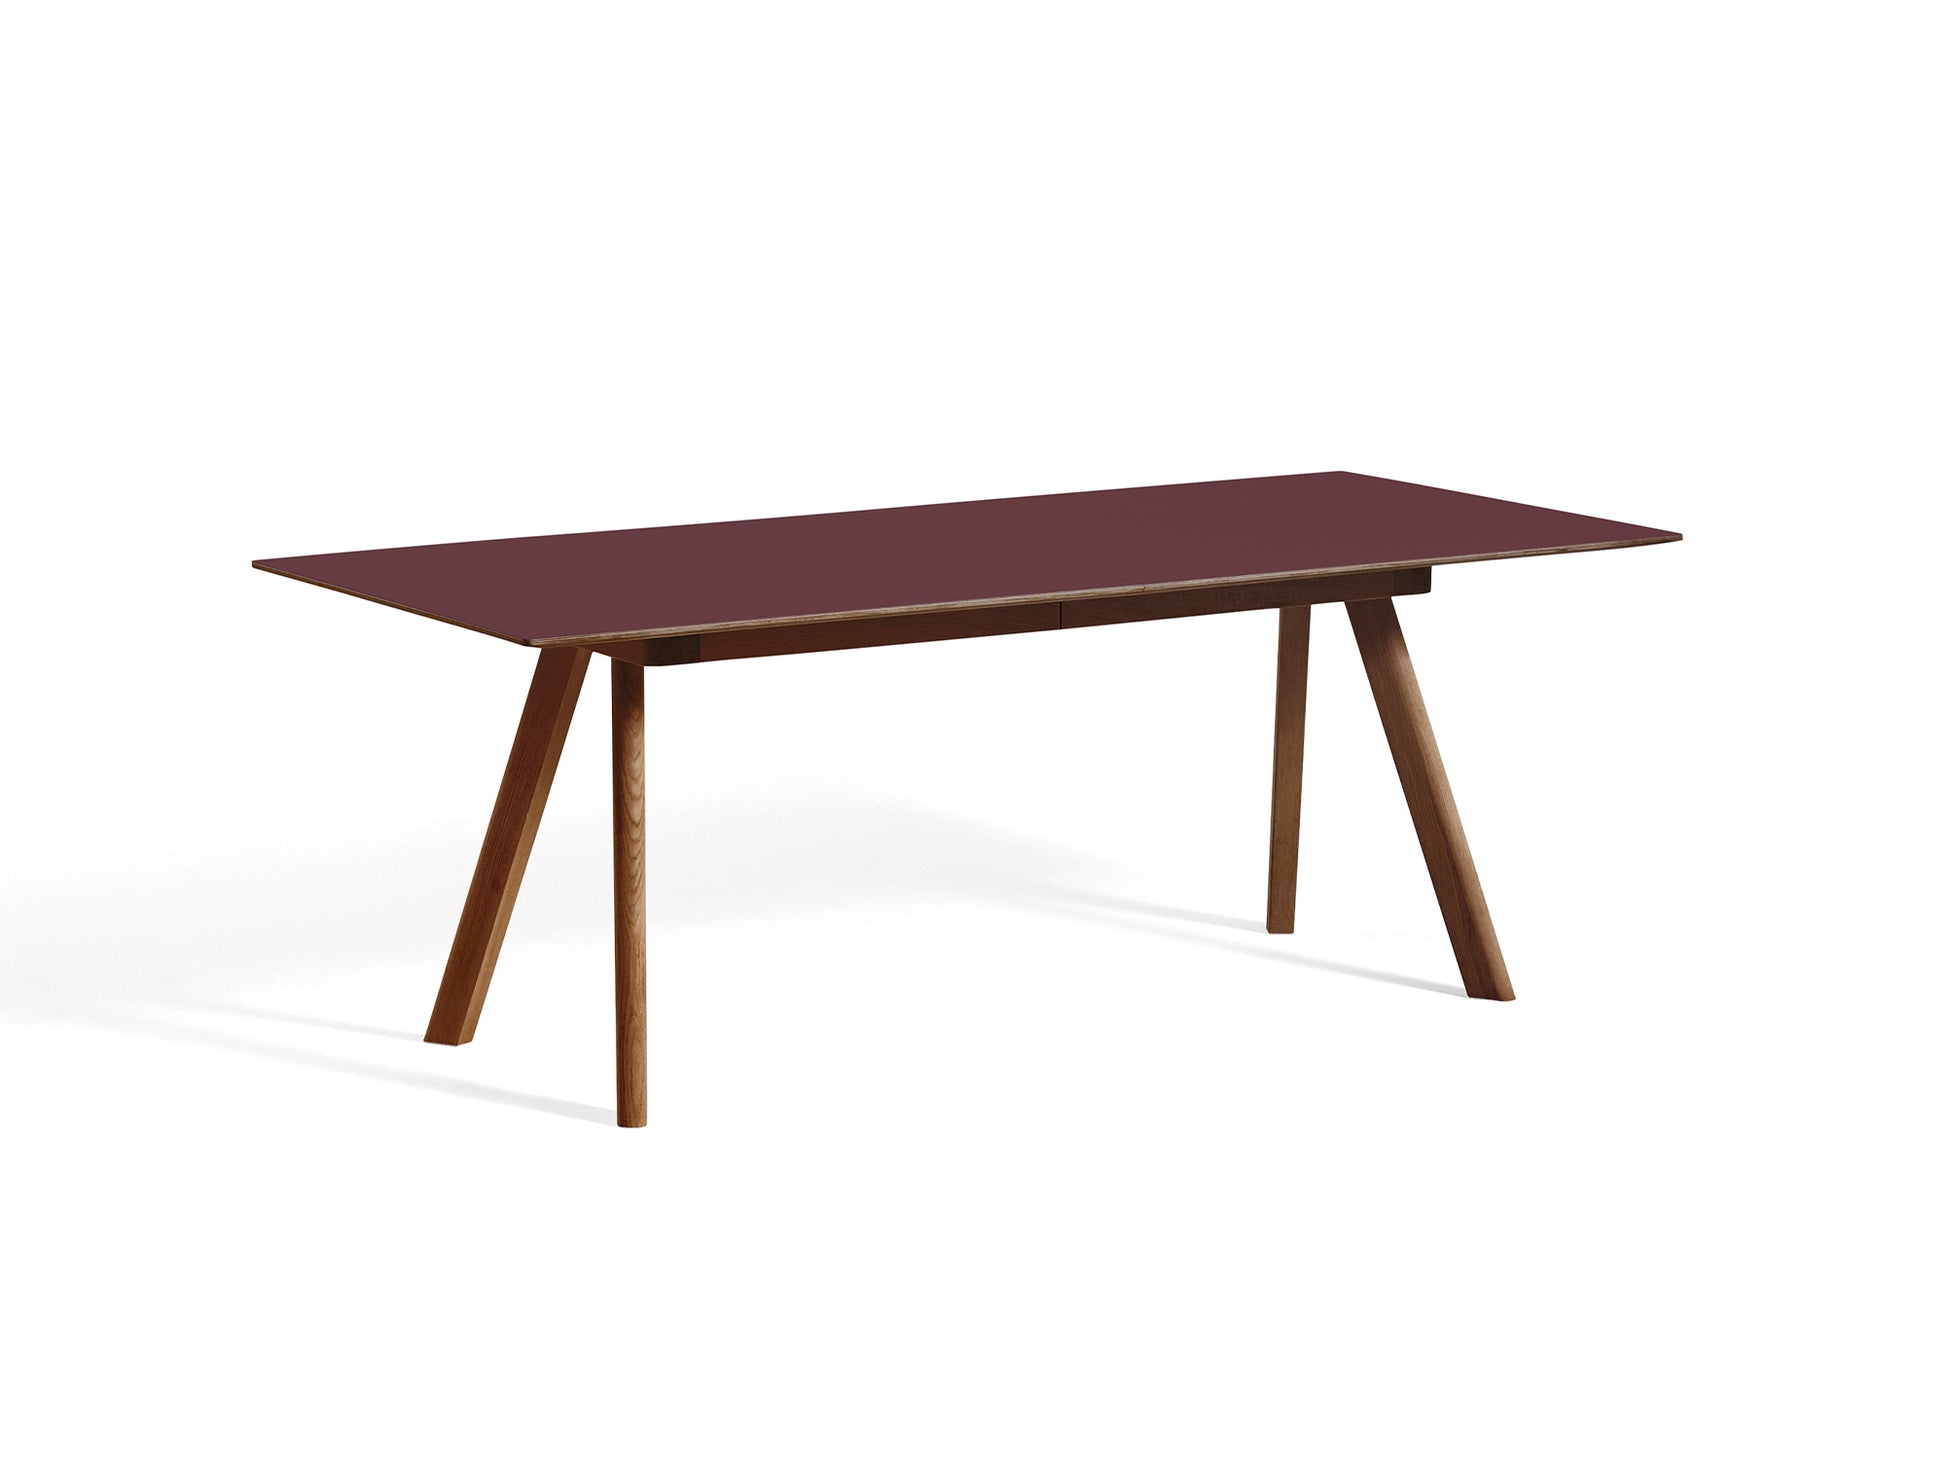 CPH30 Extendable Dining Table by HAY - L200 cm / Burgundy Linoleum Tabletop with Lacquered Walnut Oak Base